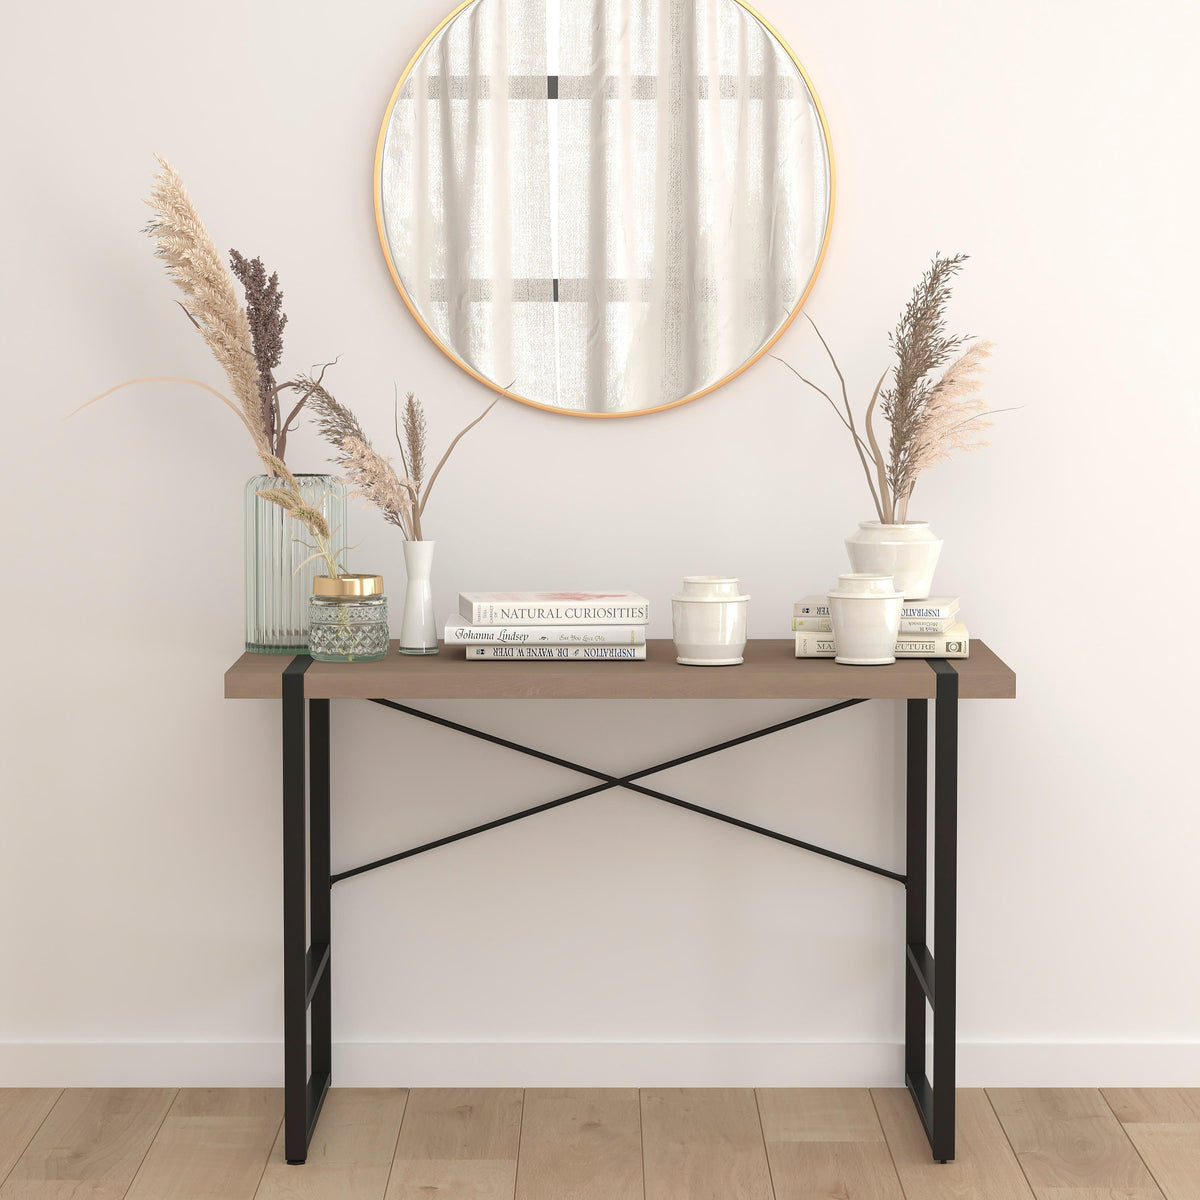 Rustic Wood Grain Finish Console Table with Cross Brace Backing